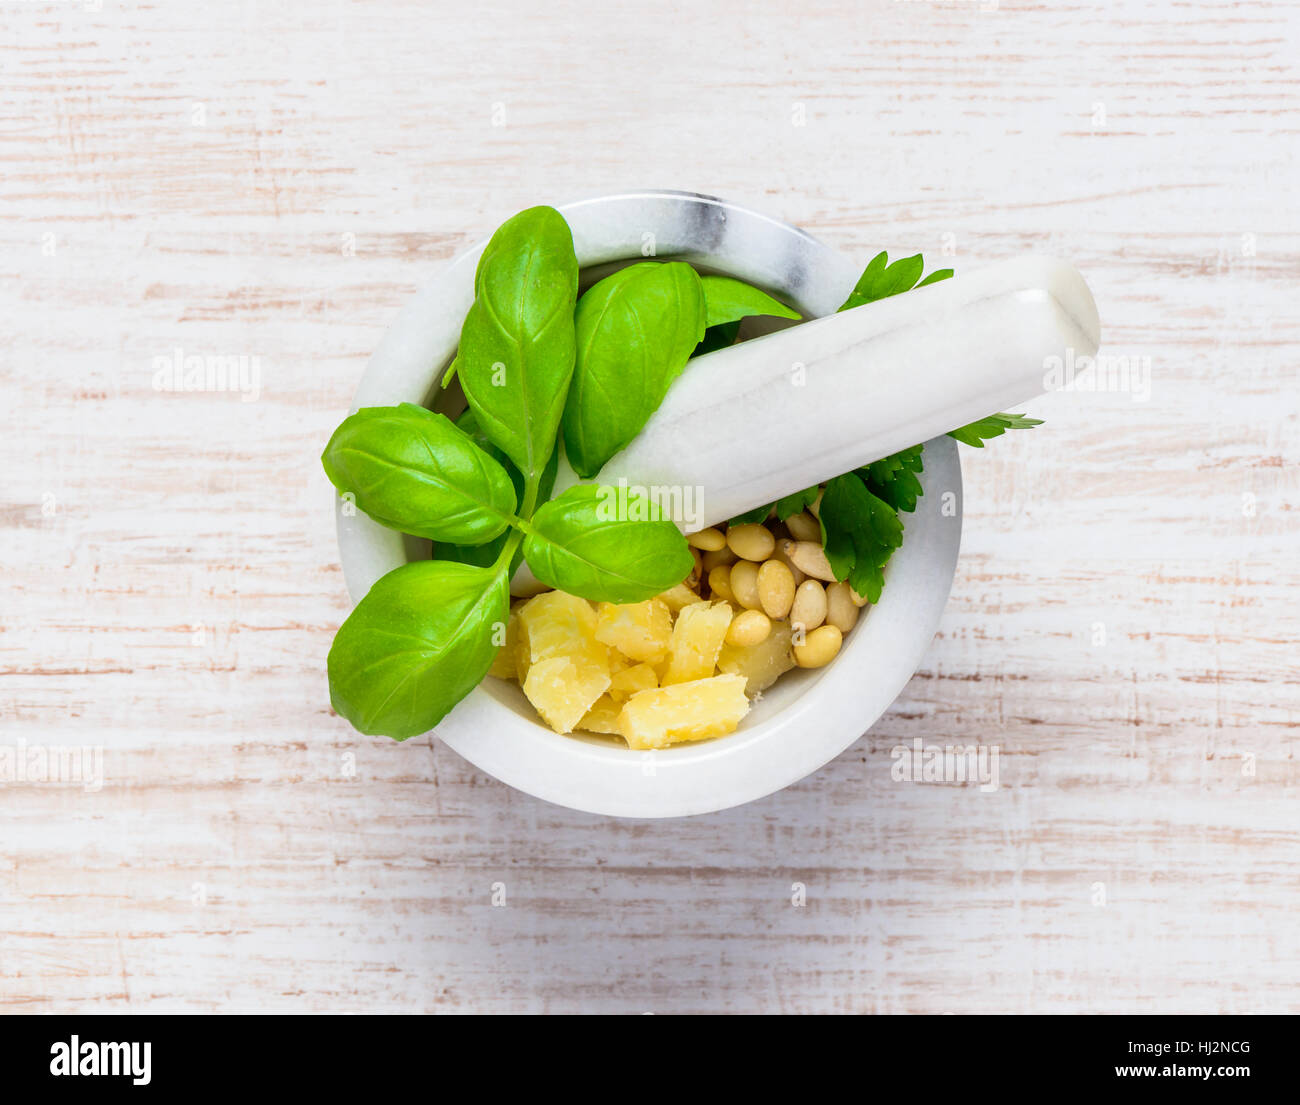 Top View of Green Fresh Basil Herbs in Pestle and Mortar with Parmesan cheese and Pine Nuts Stock Photo